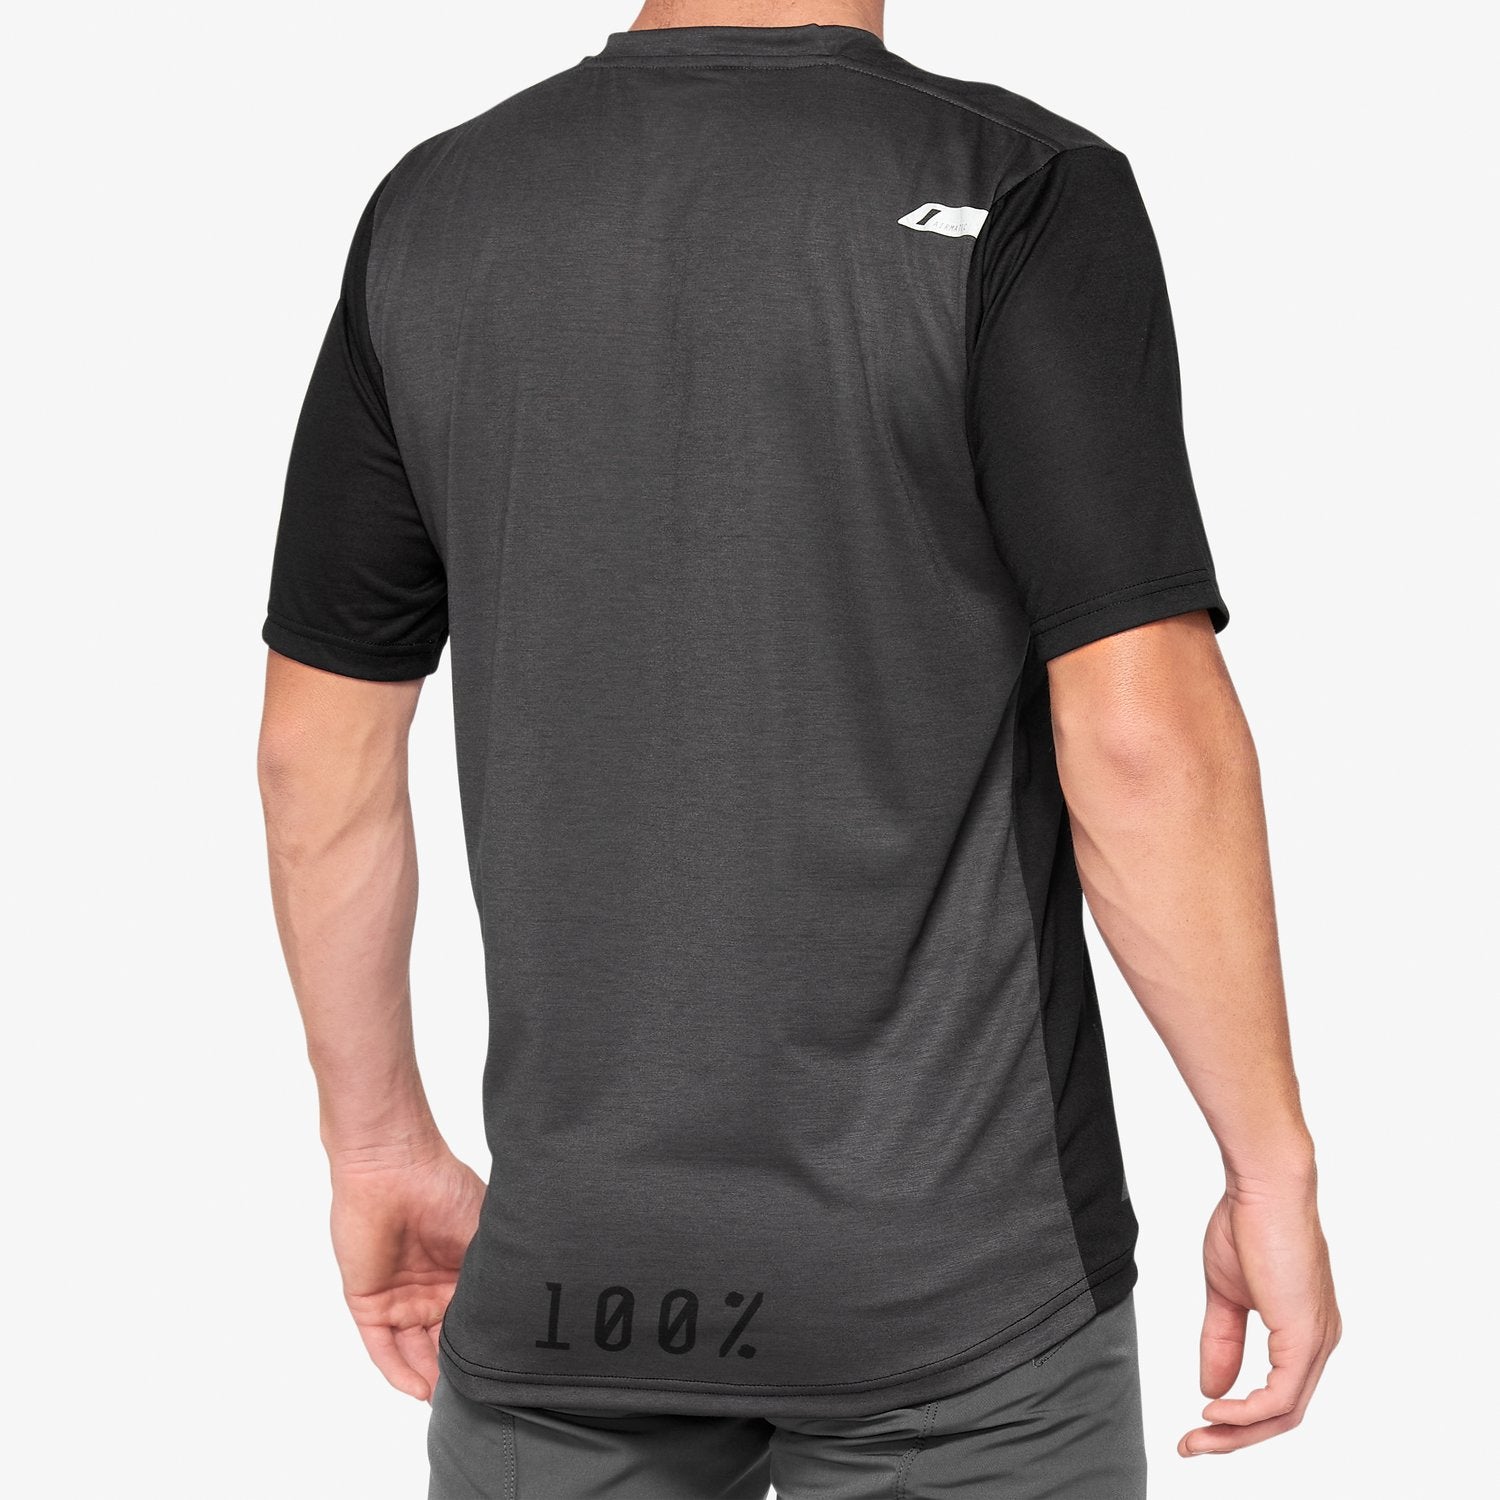 Airmatic jersey black/charcoal